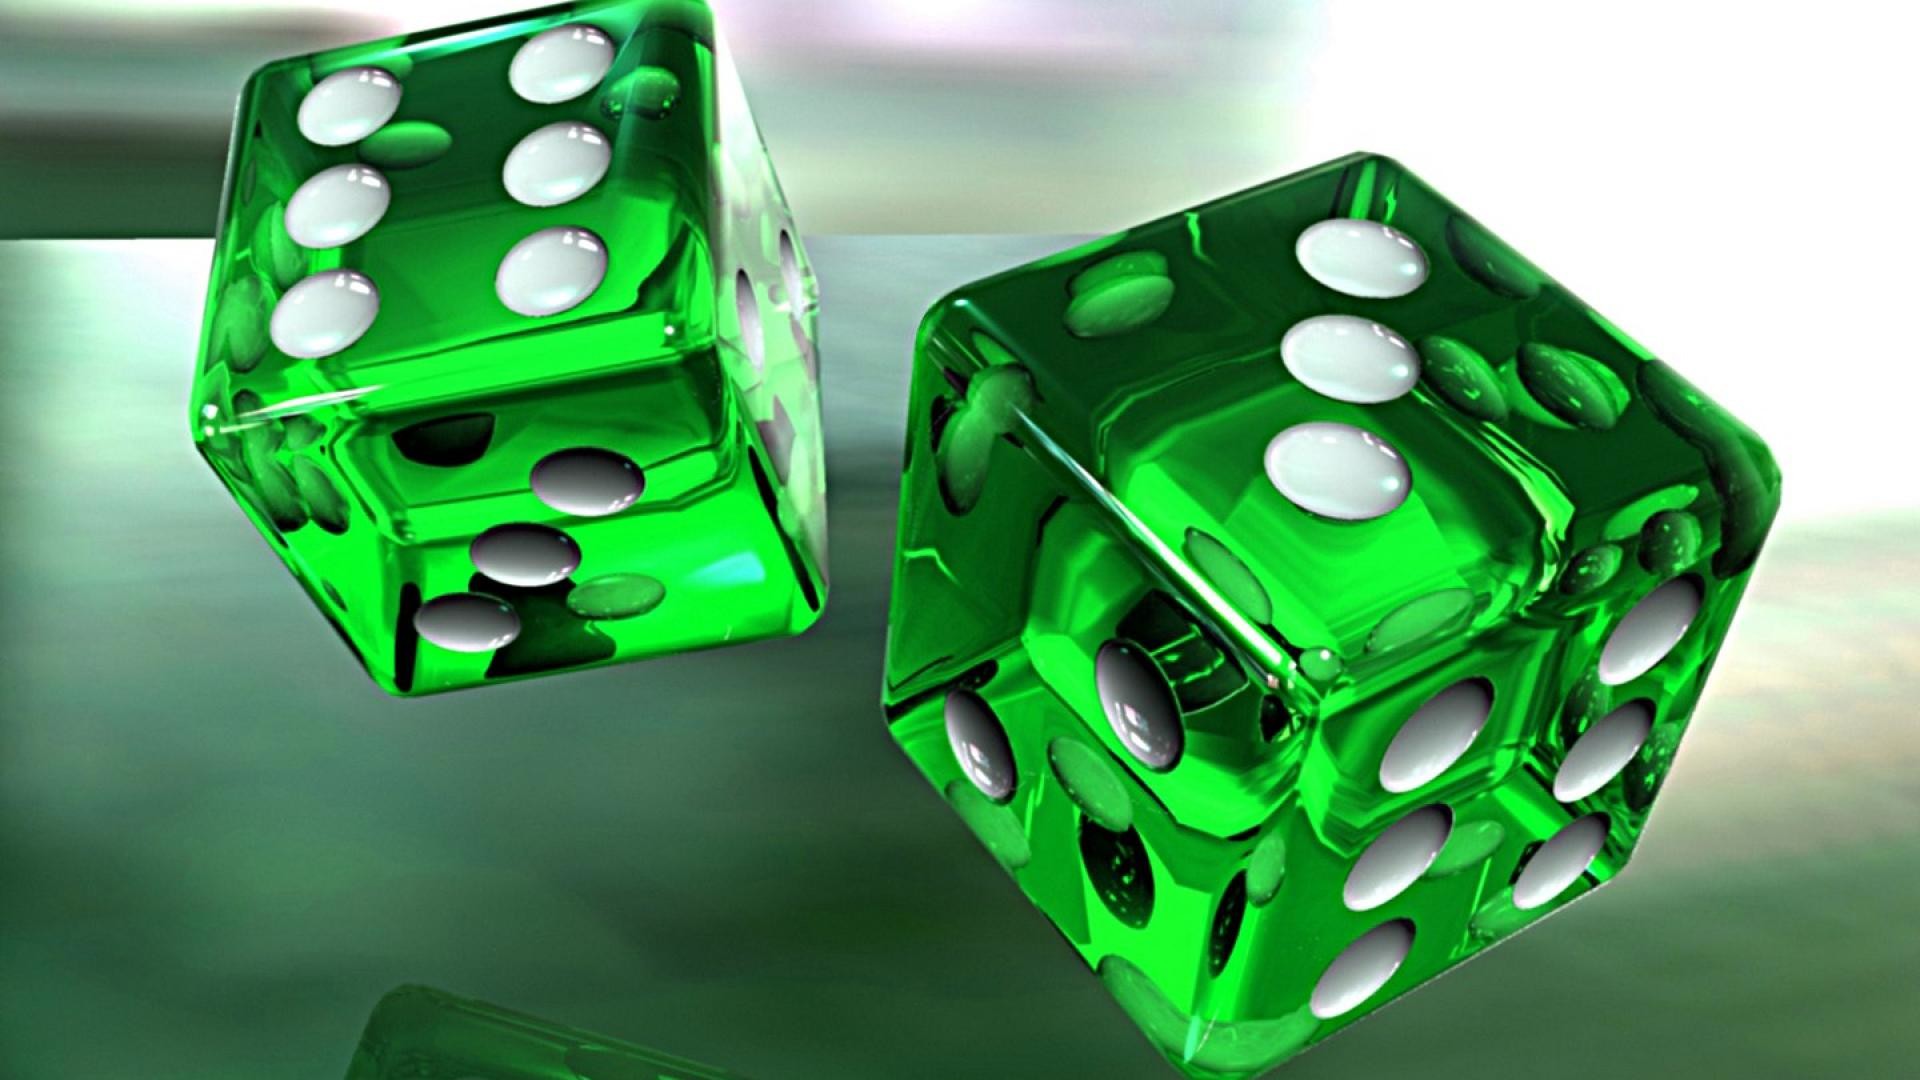 3d wallpaper,green,games,dice game,dice,indoor games and sports